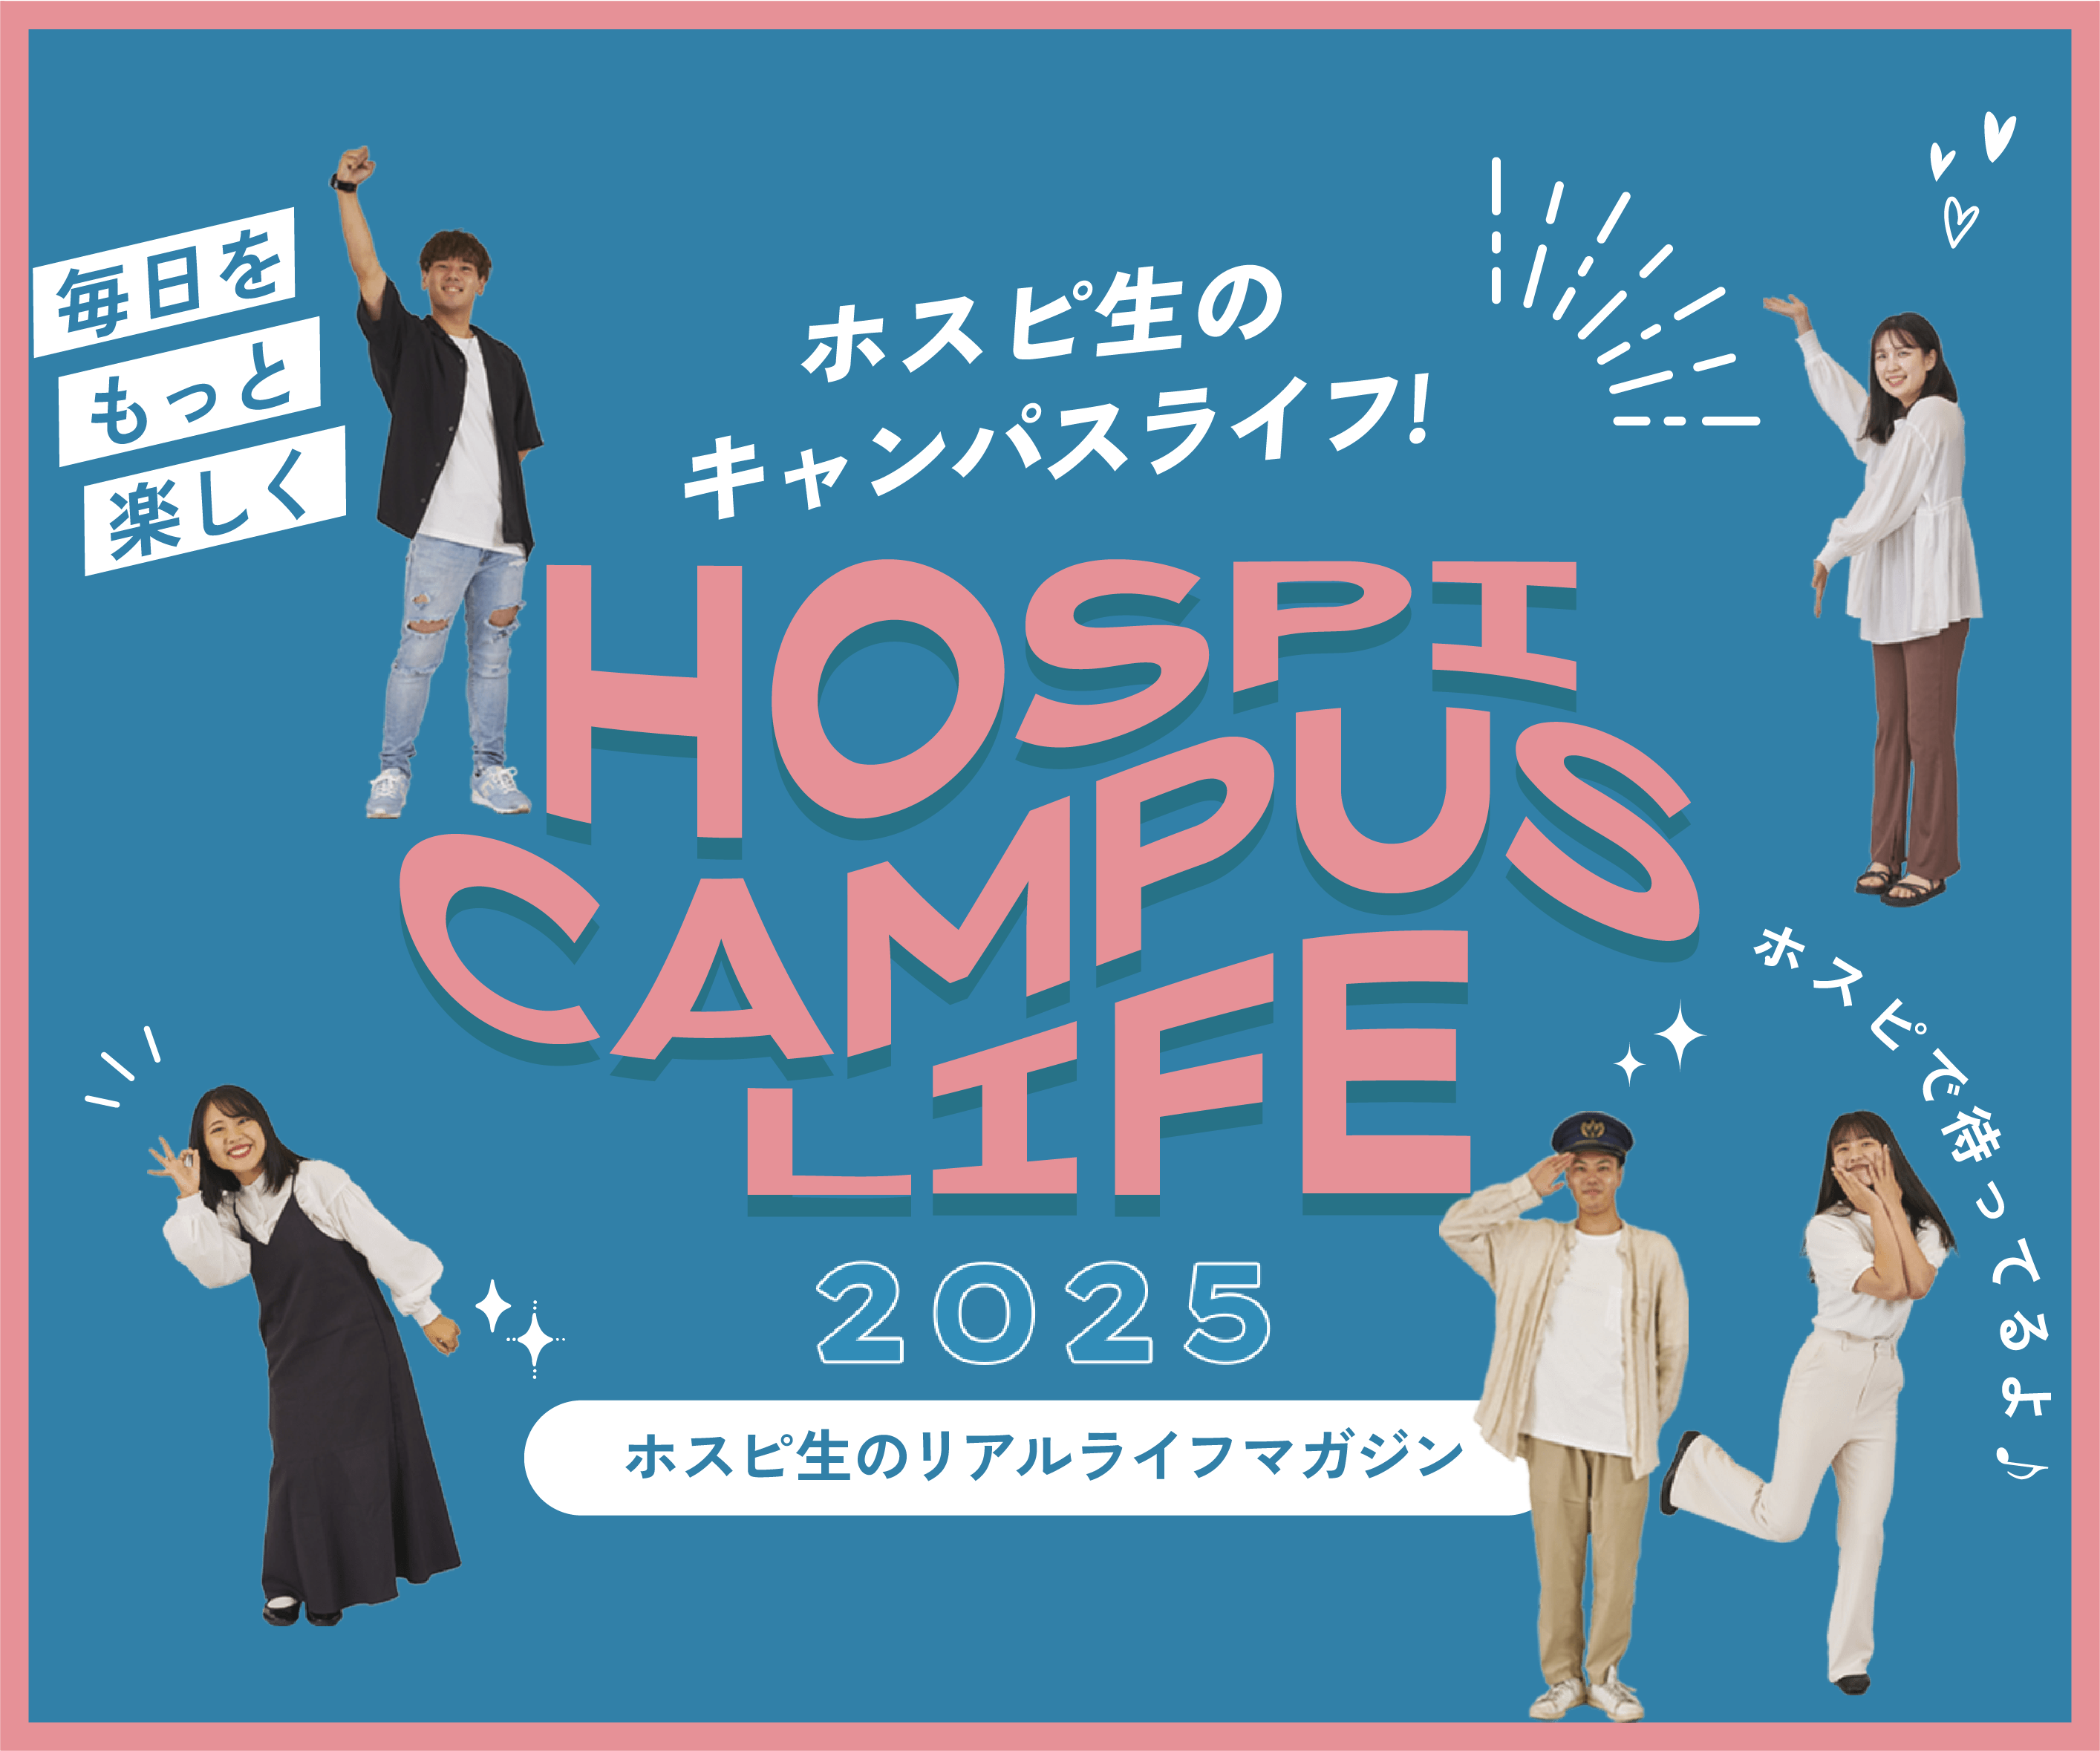 Campus life for hospice students!